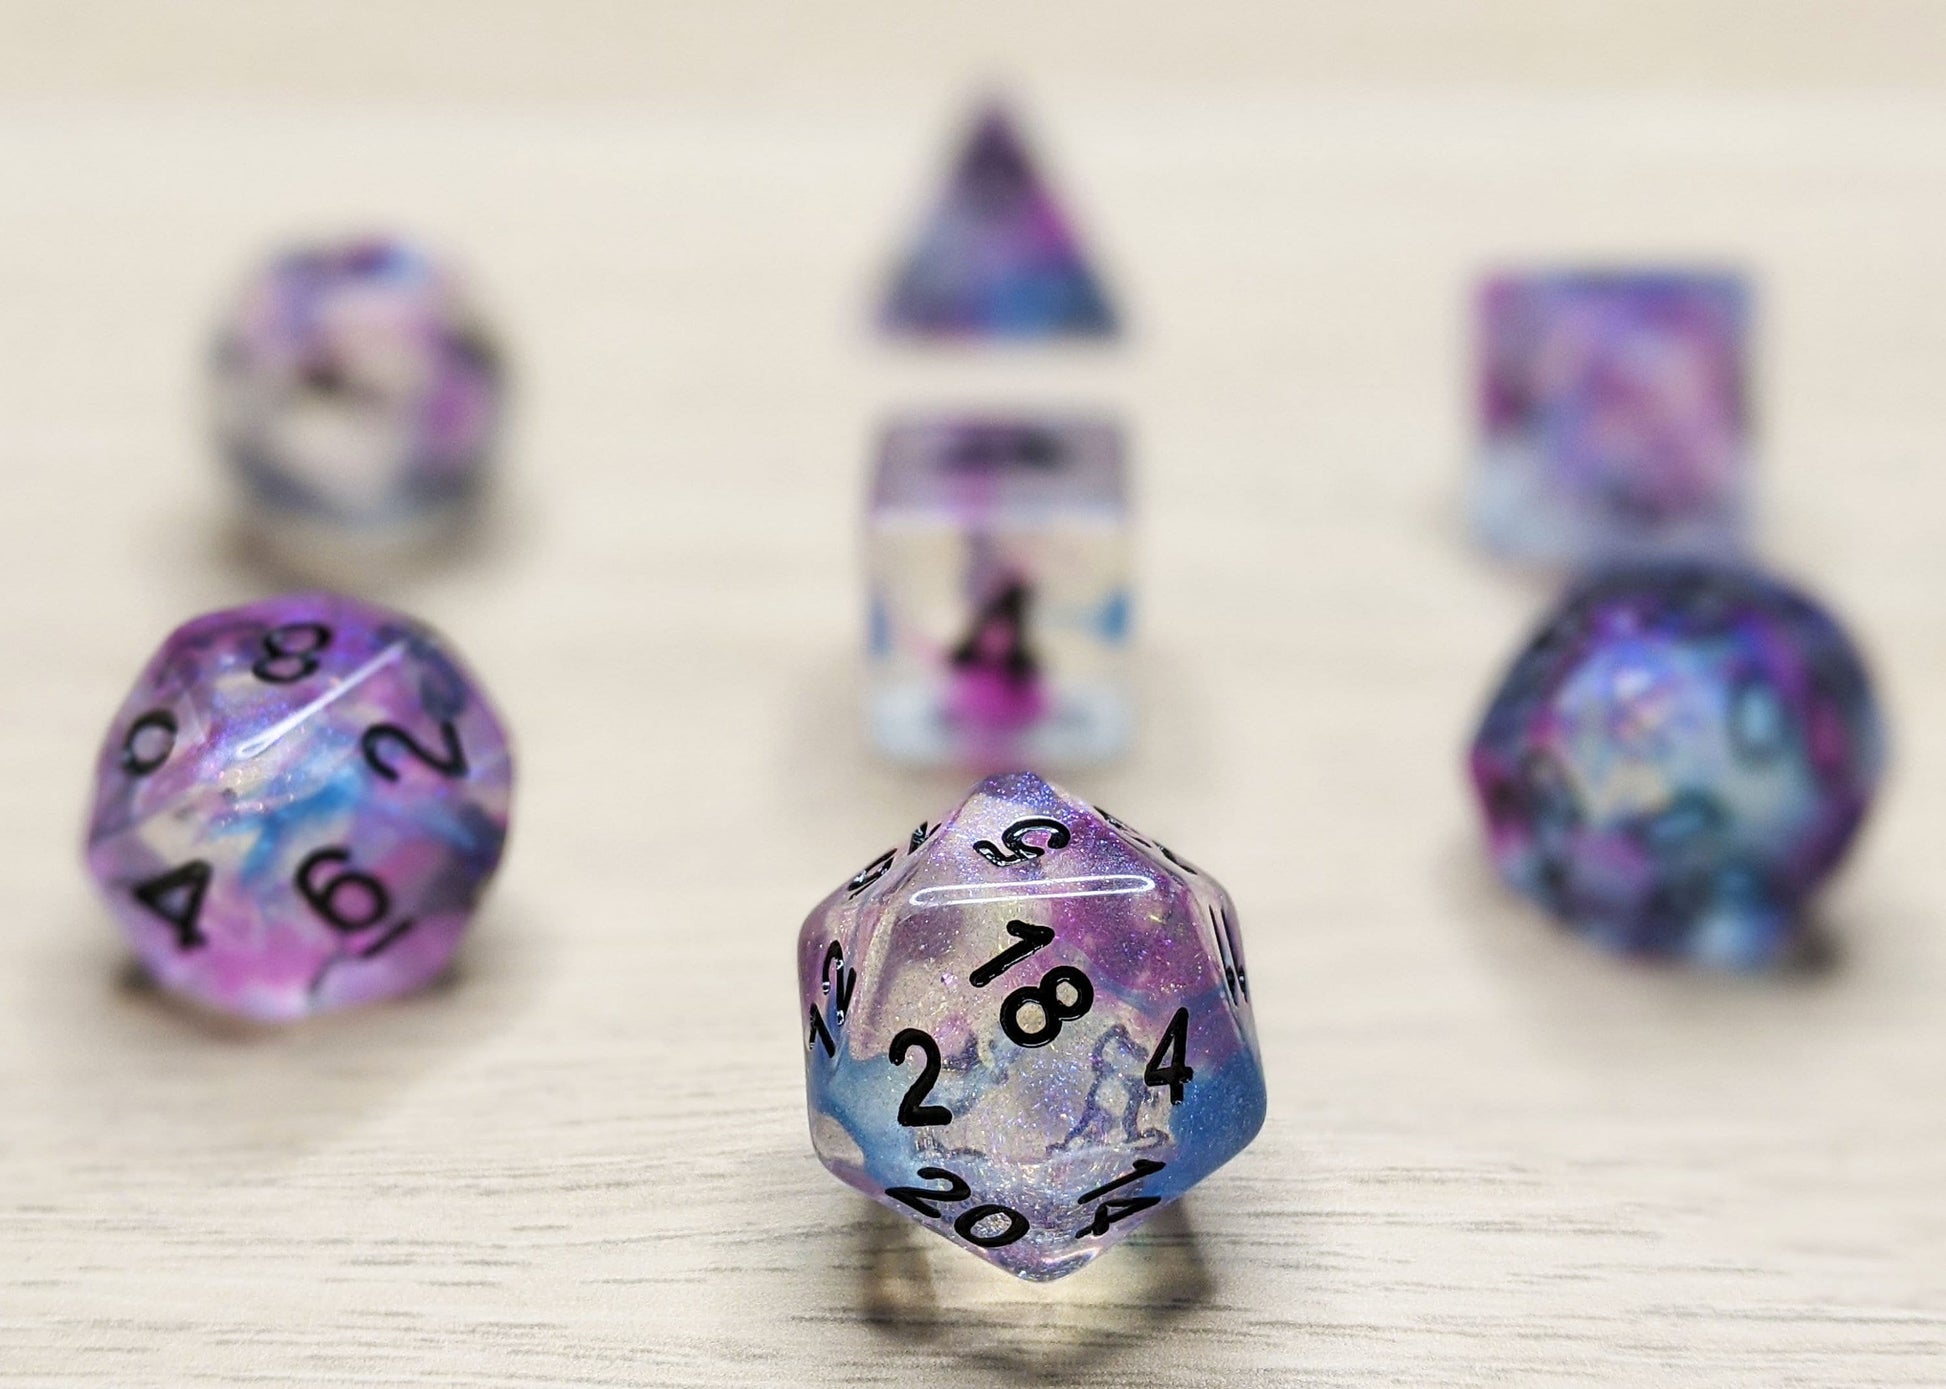 Ceremonial Chrome Polyhedral Dice Set - Clear with Blue and Purple Swirls and micro glitter